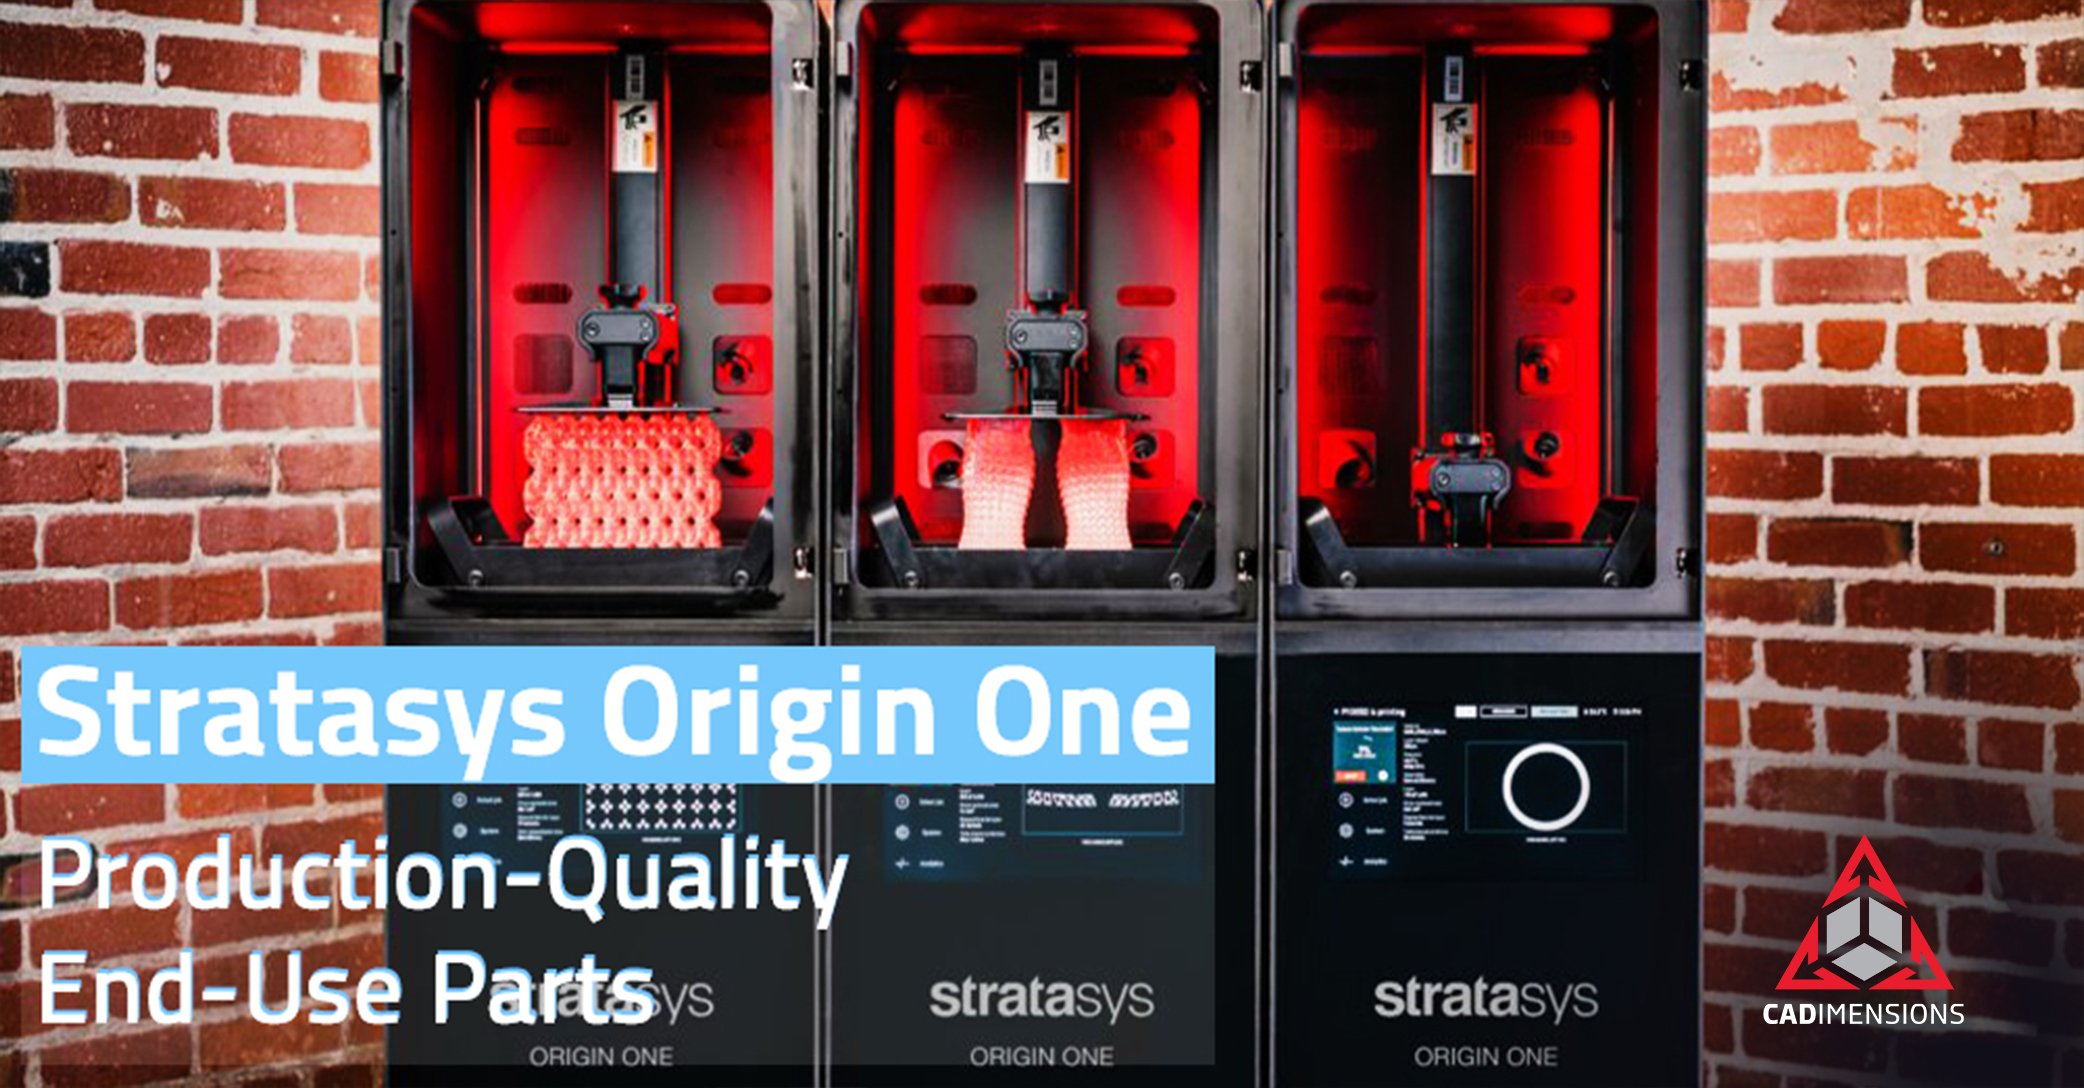 Stratasys Origin One: A 3D Printer for Production Parts